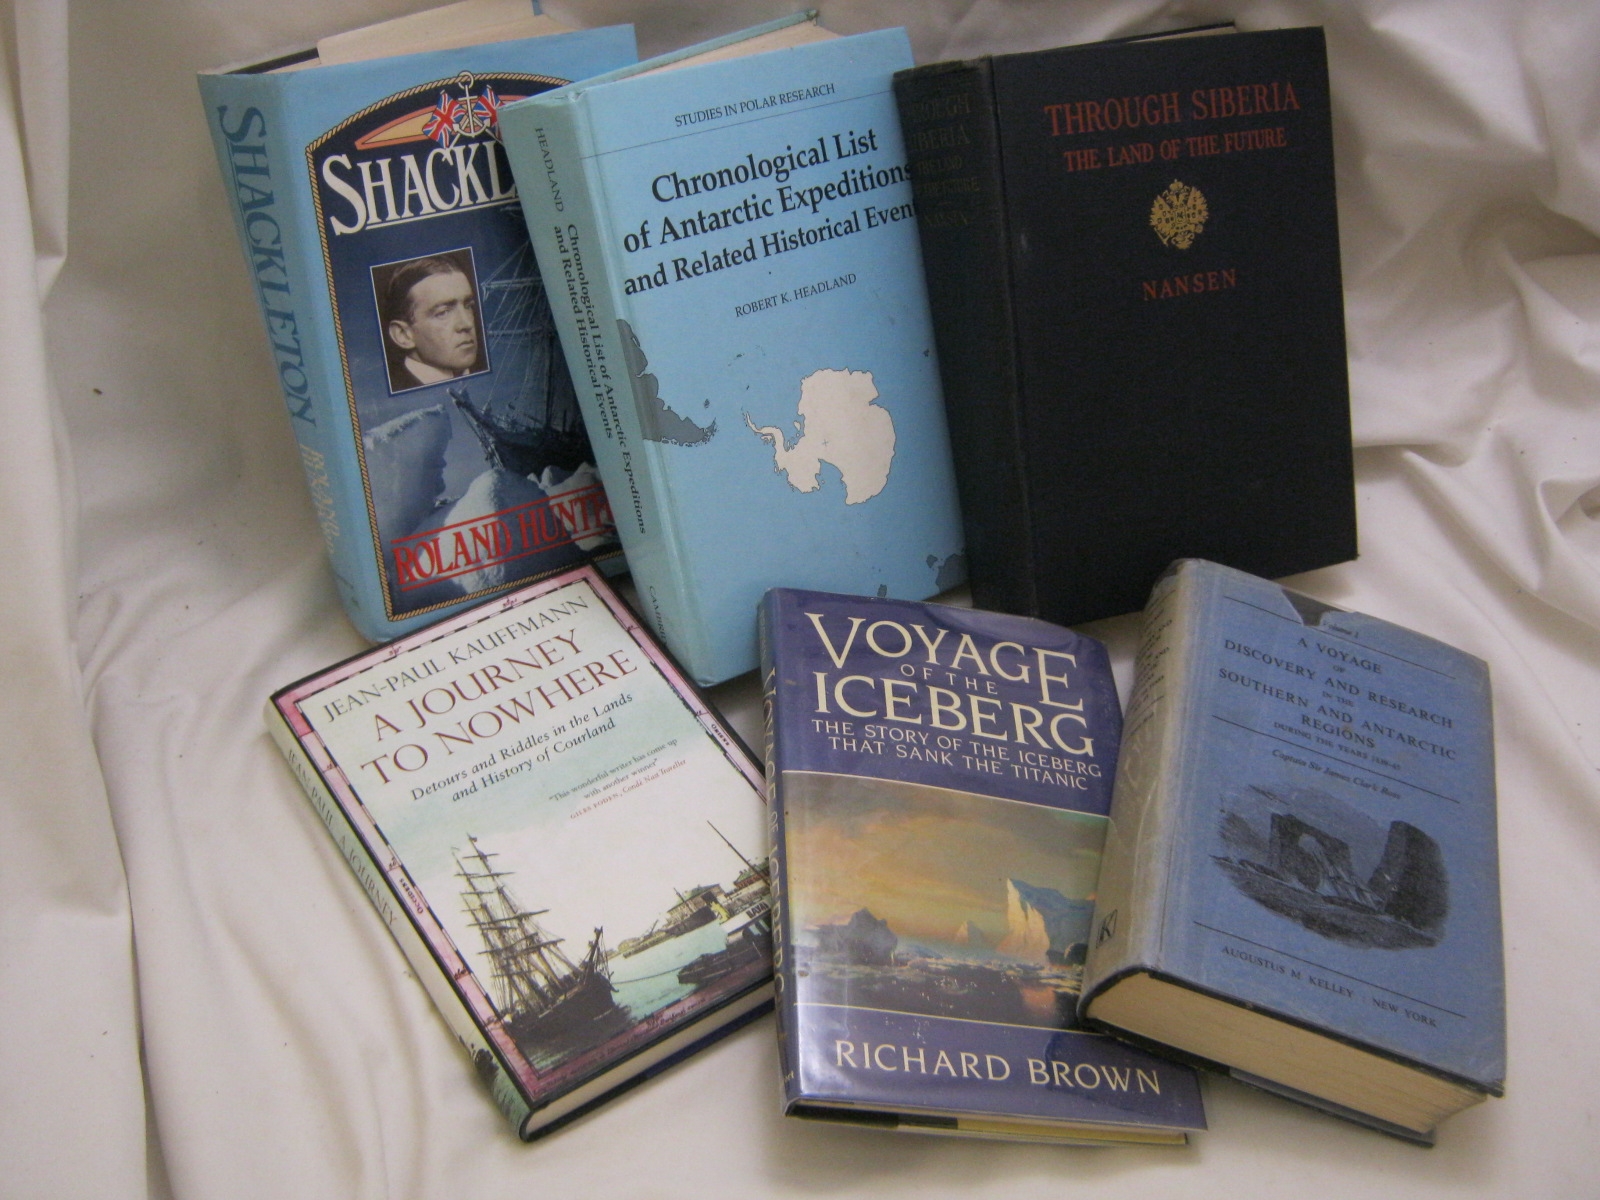 CAPTAIN SIR JAMES CLARK ROSS: A VOYAGE OF DISCOVERY AND RESEARCH IN THE SOUTHERN AND ANTARCTIC